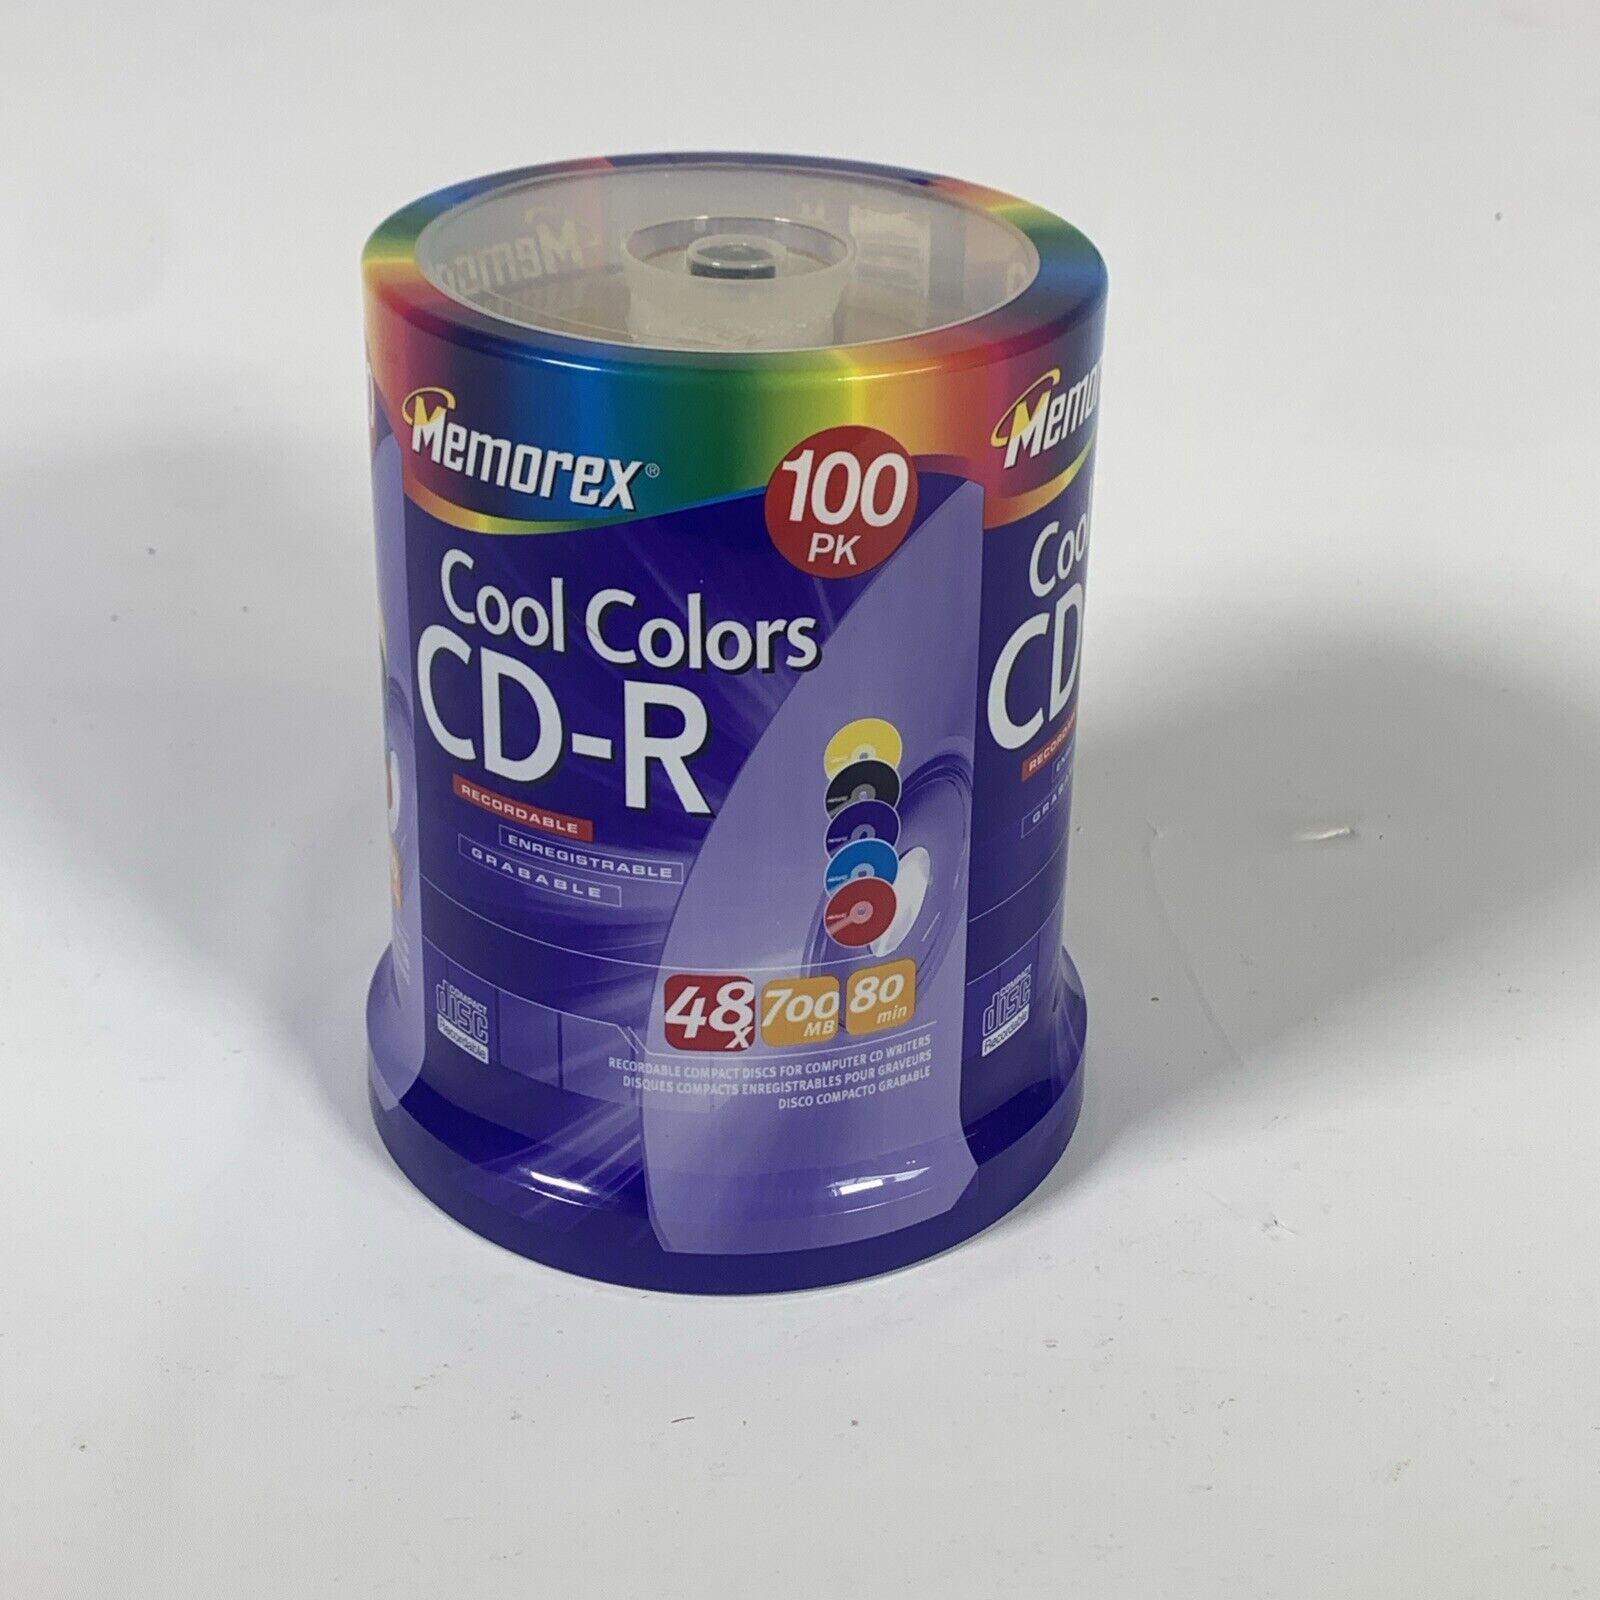 NEW Memorex Cool Colors CD-R 100 Pack 48x 700 MB 80 Minute Recordable Blank CD